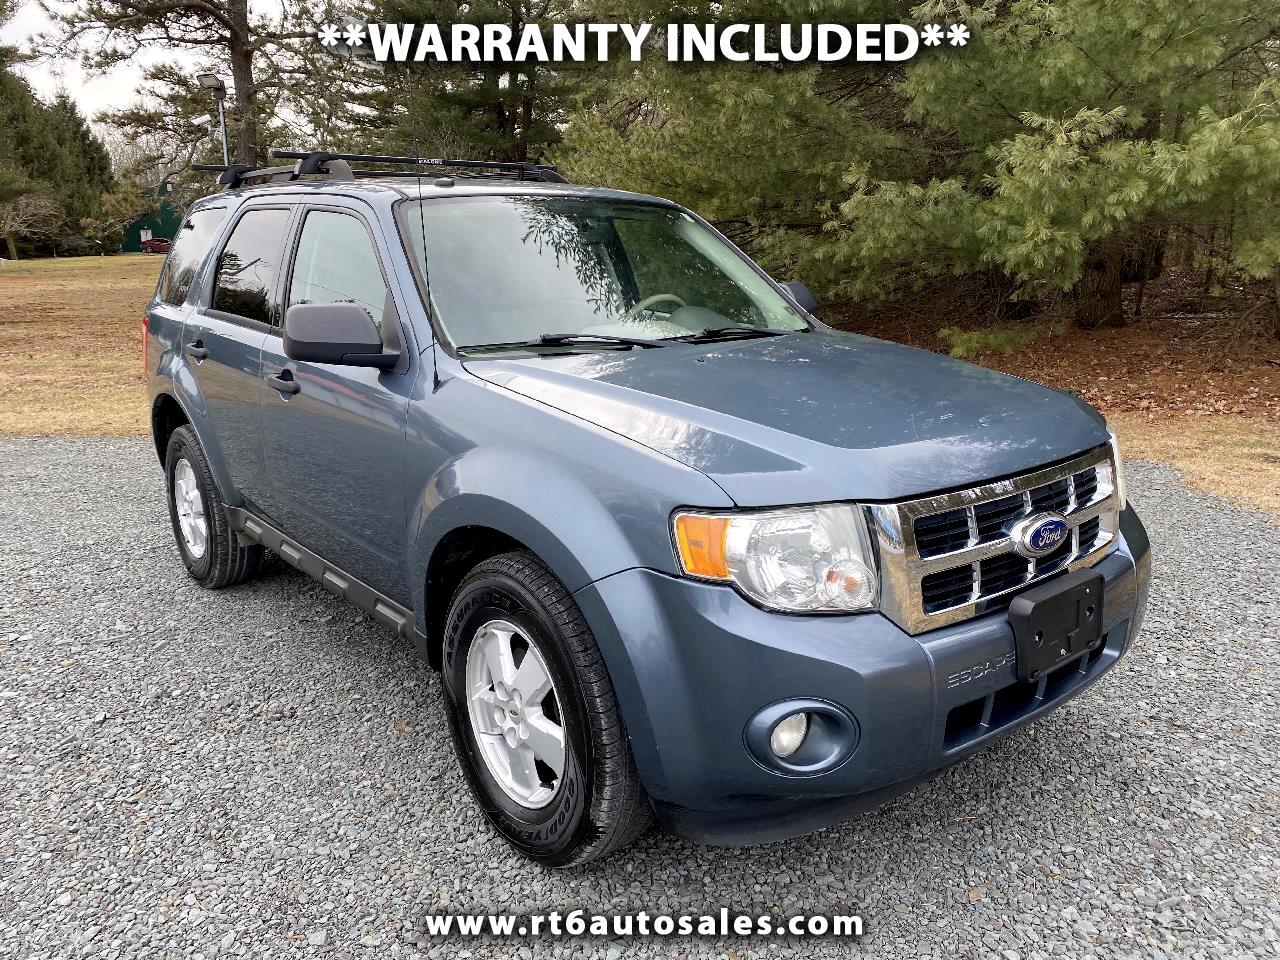 Used 2010 Ford Escape XLT 4WD for Sale in Shohola PA 18458 Rt 6 Auto Sales  LLC